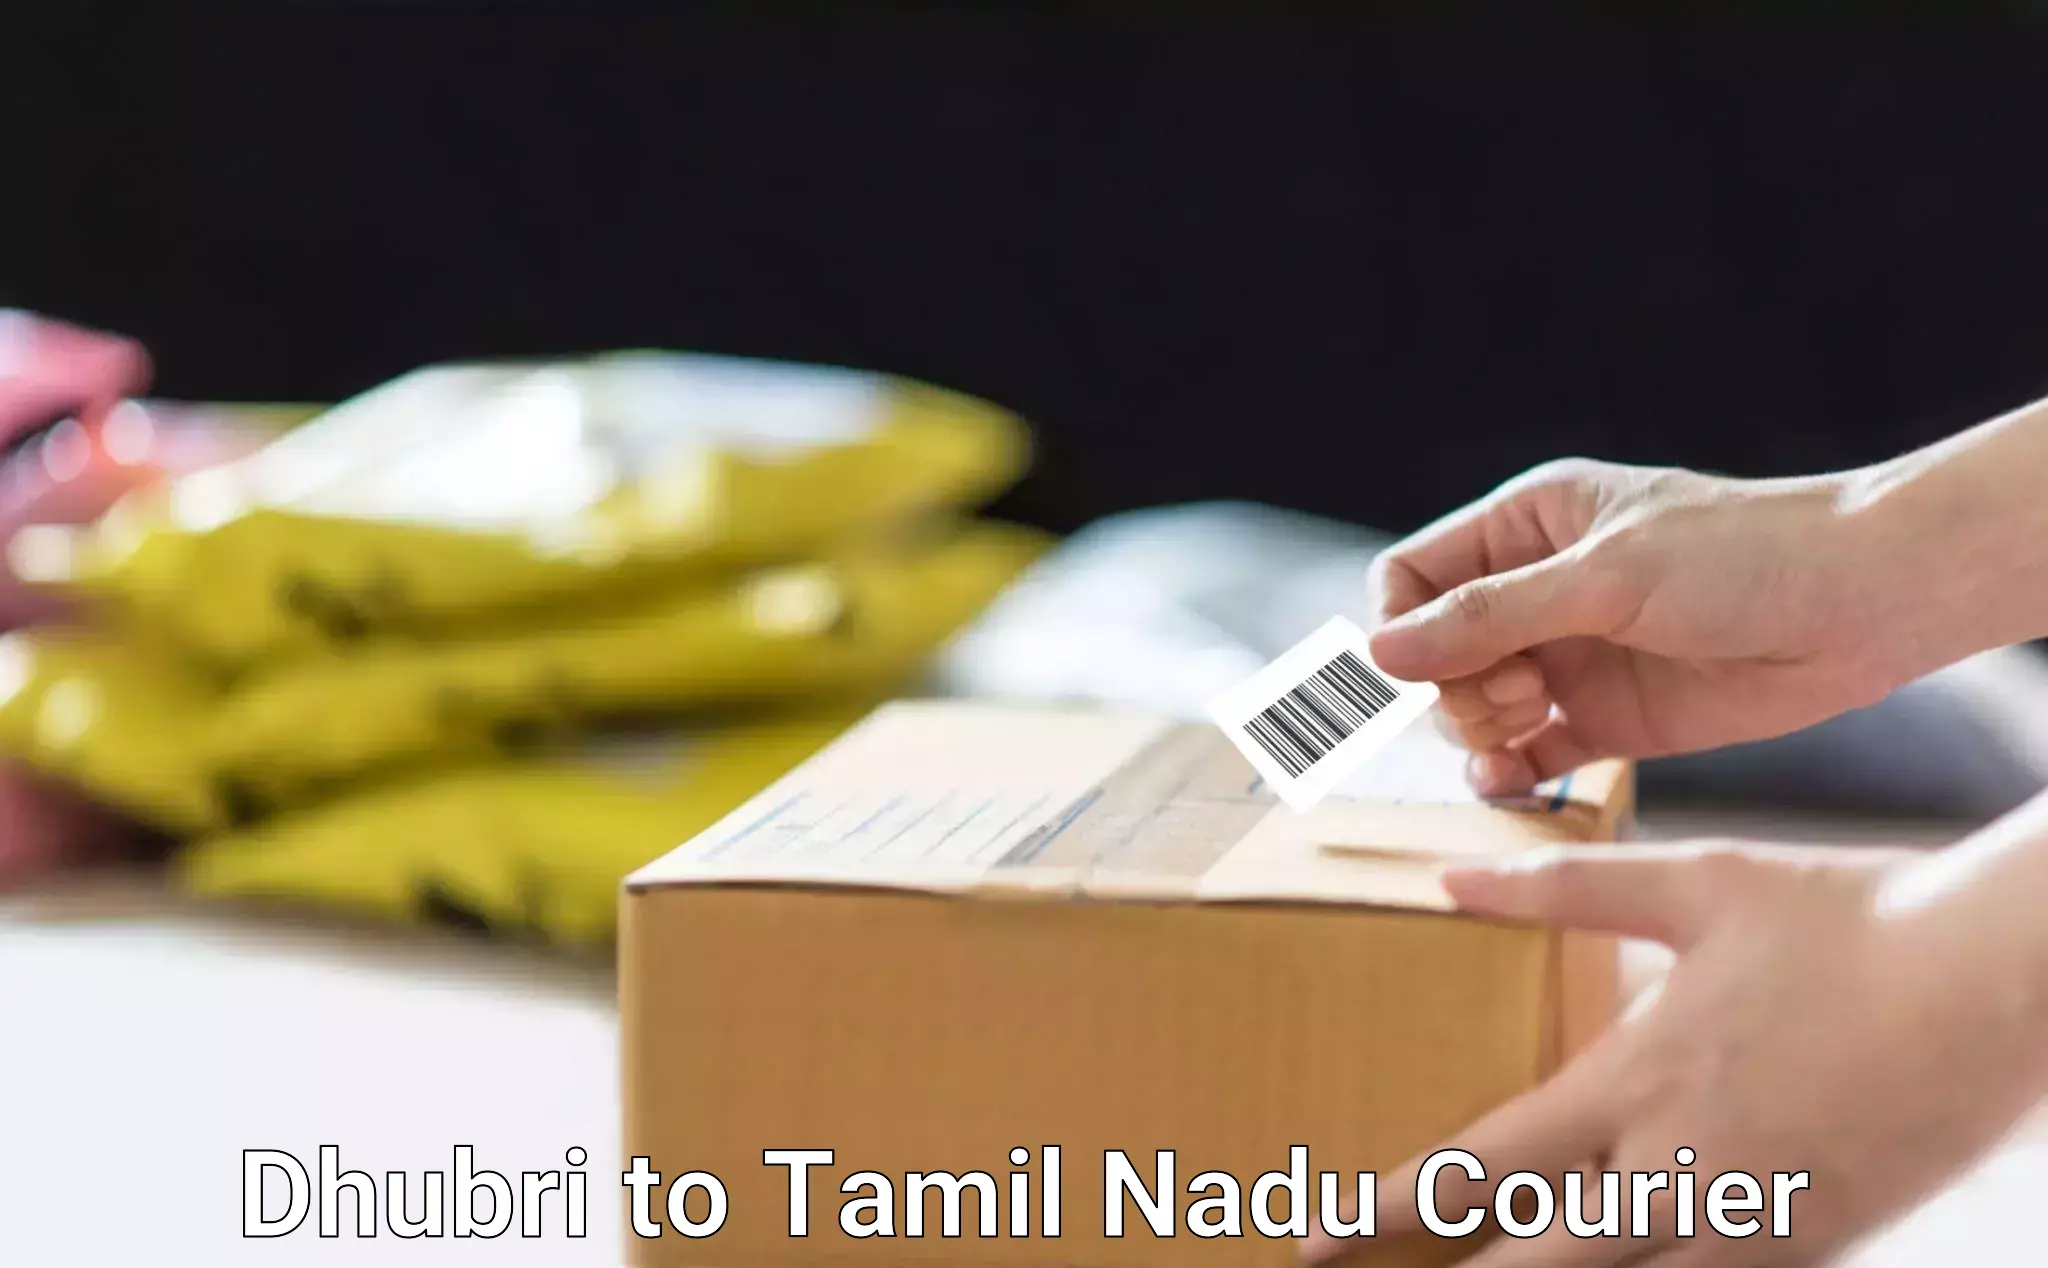 Special handling courier Dhubri to Ennore Port Chennai